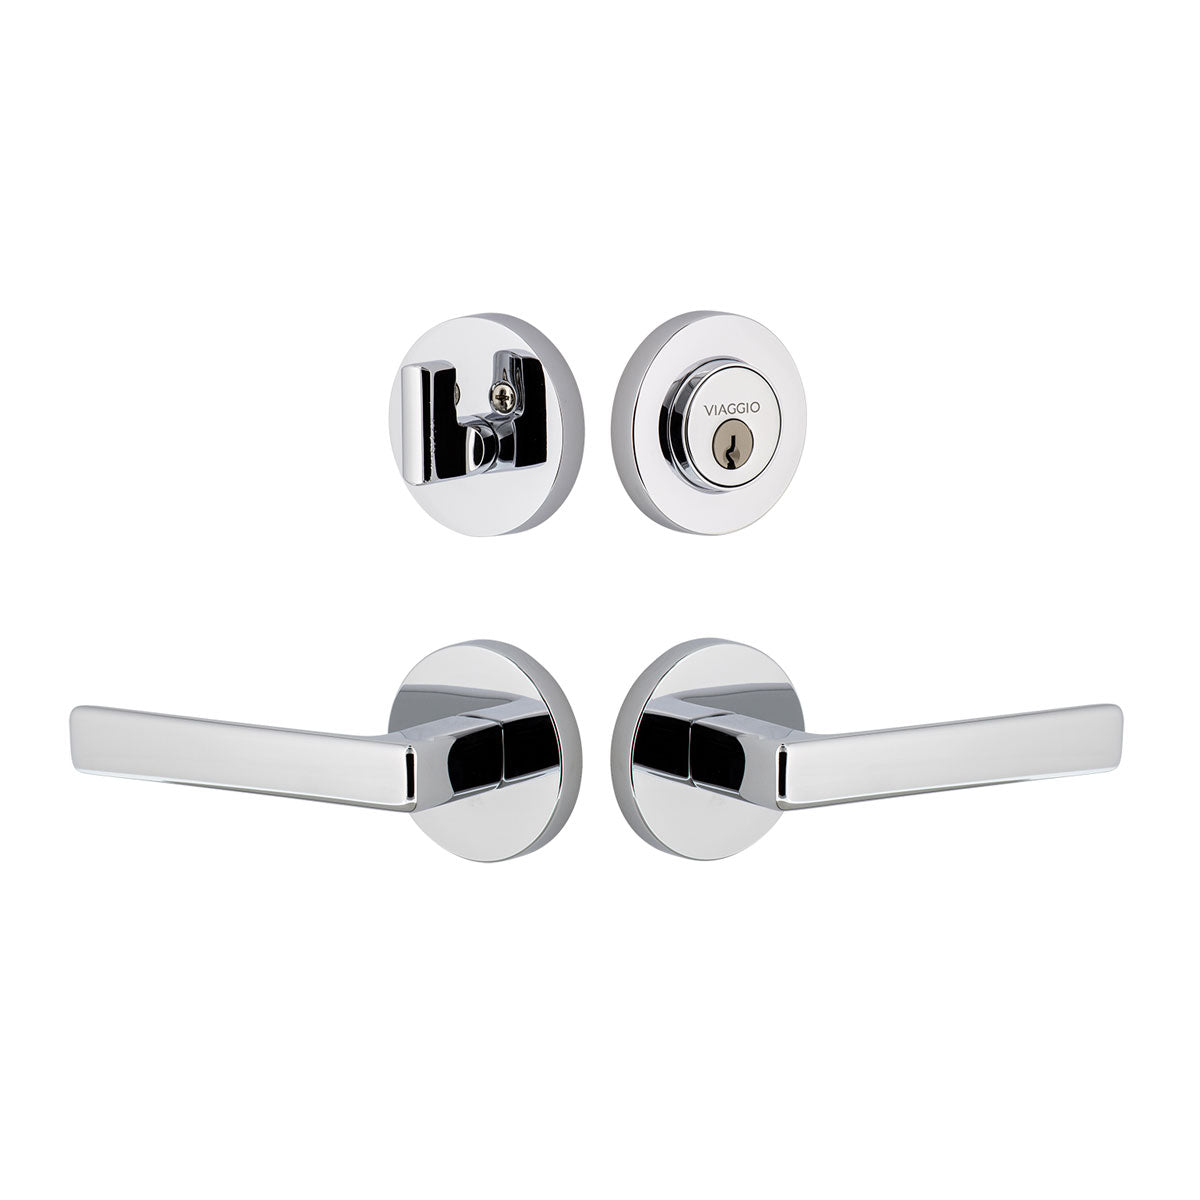 Circolo Rosette Entry Set with Lusso Lever in Bright Chrome